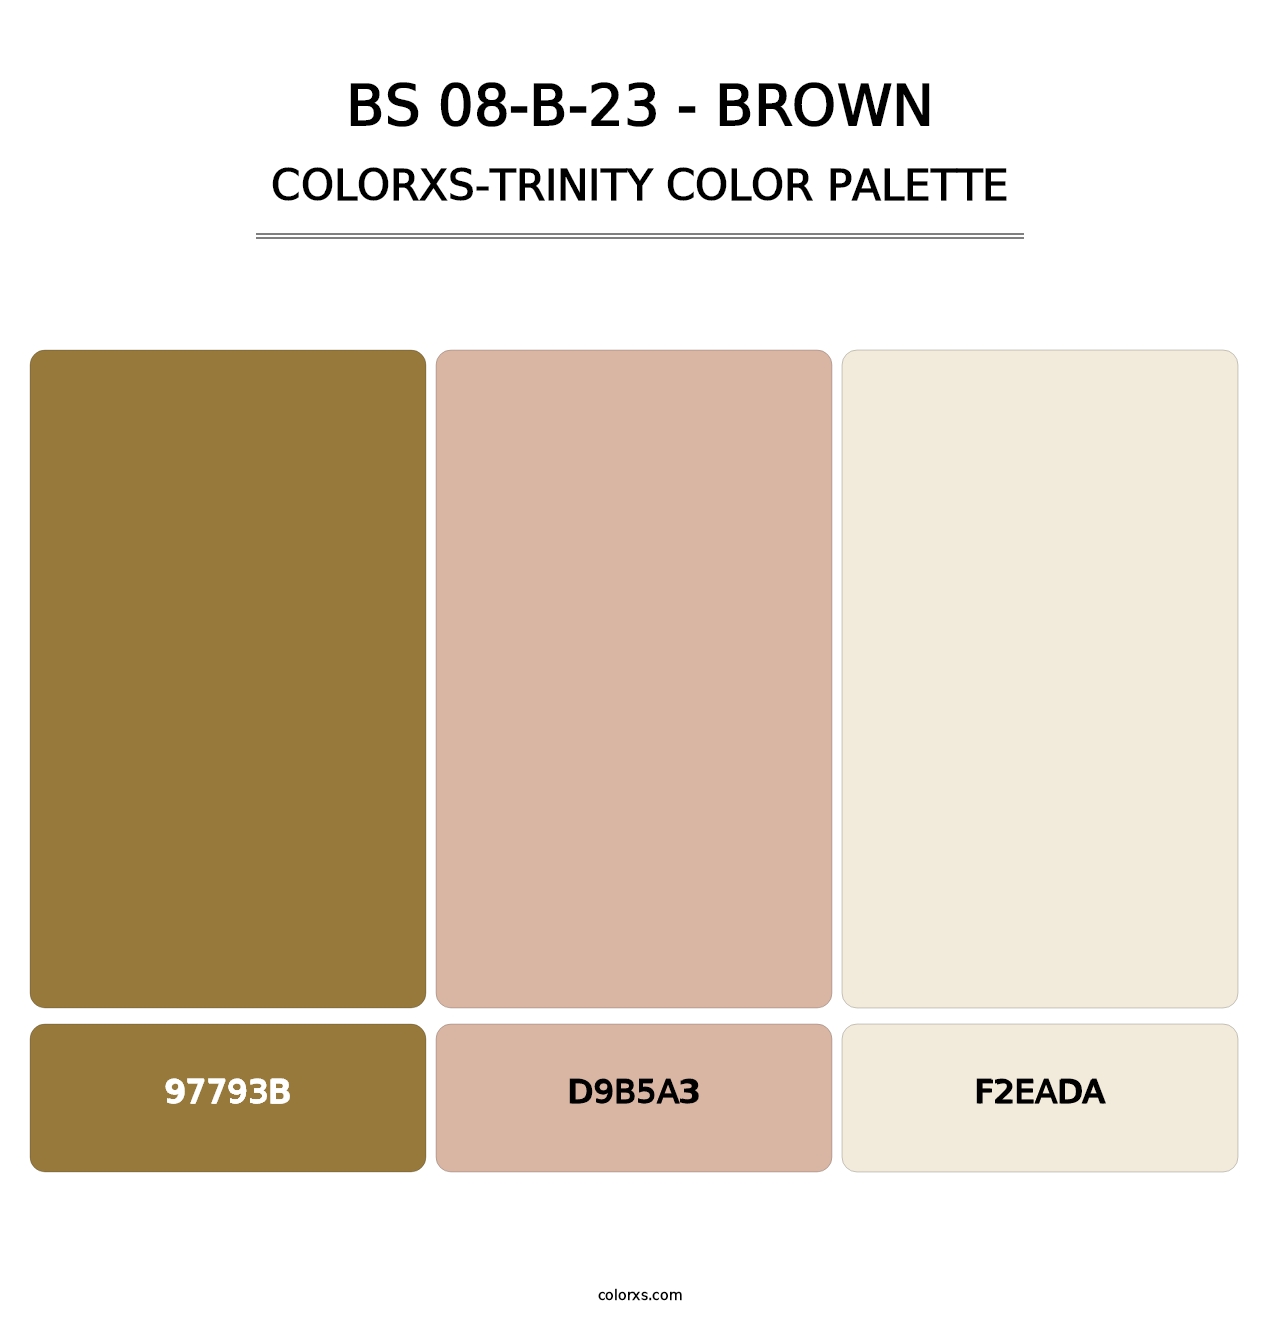 BS 08-B-23 - Brown - Colorxs Trinity Palette